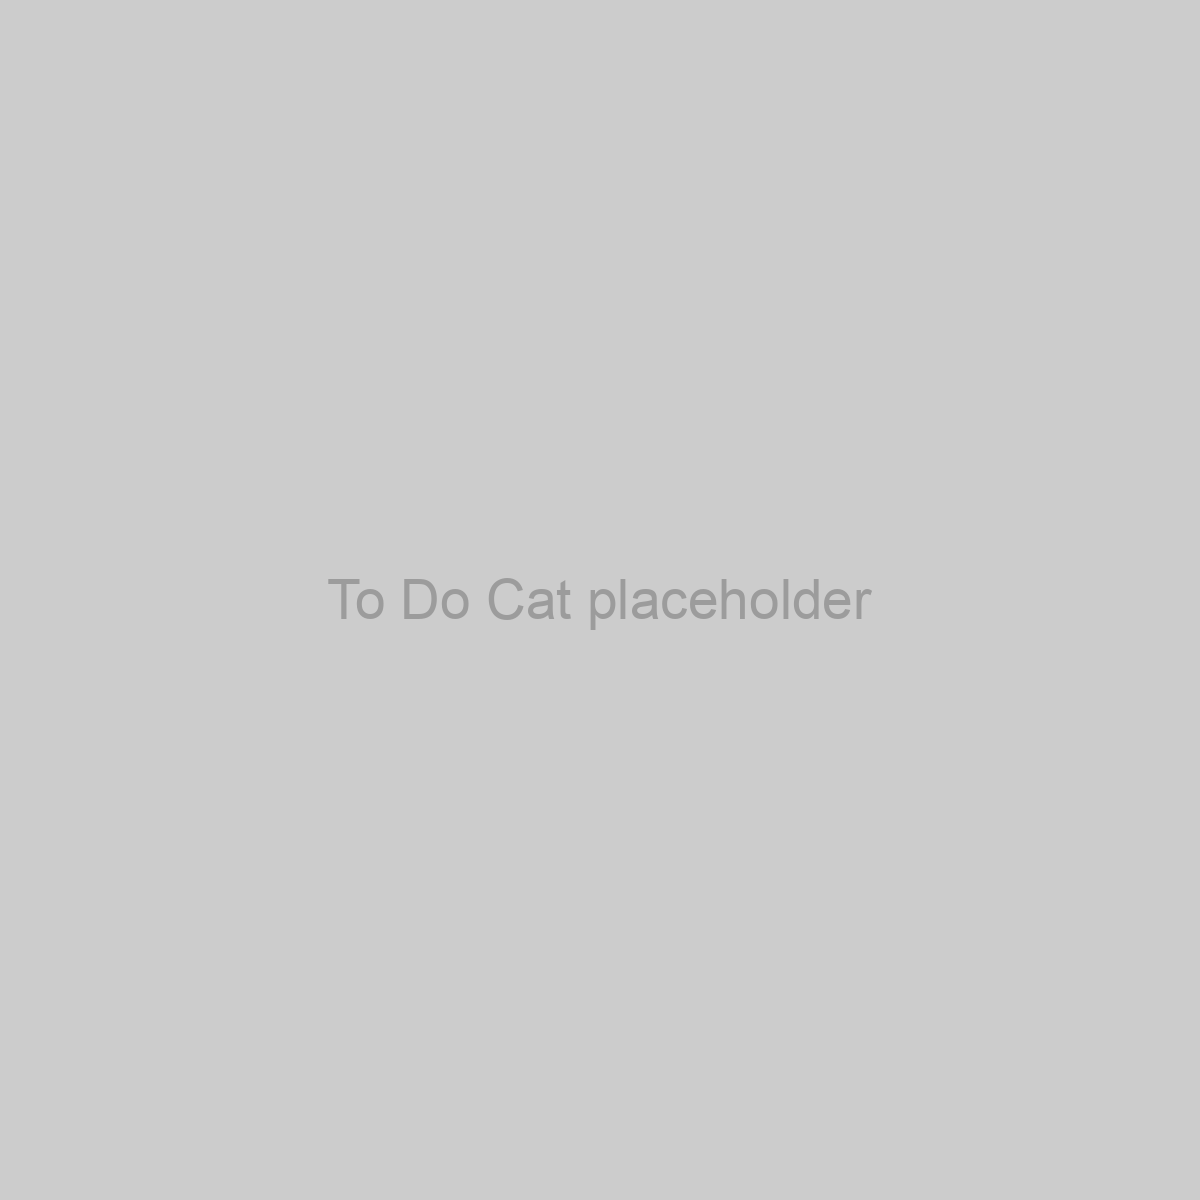 To Do Cat Placeholder Image